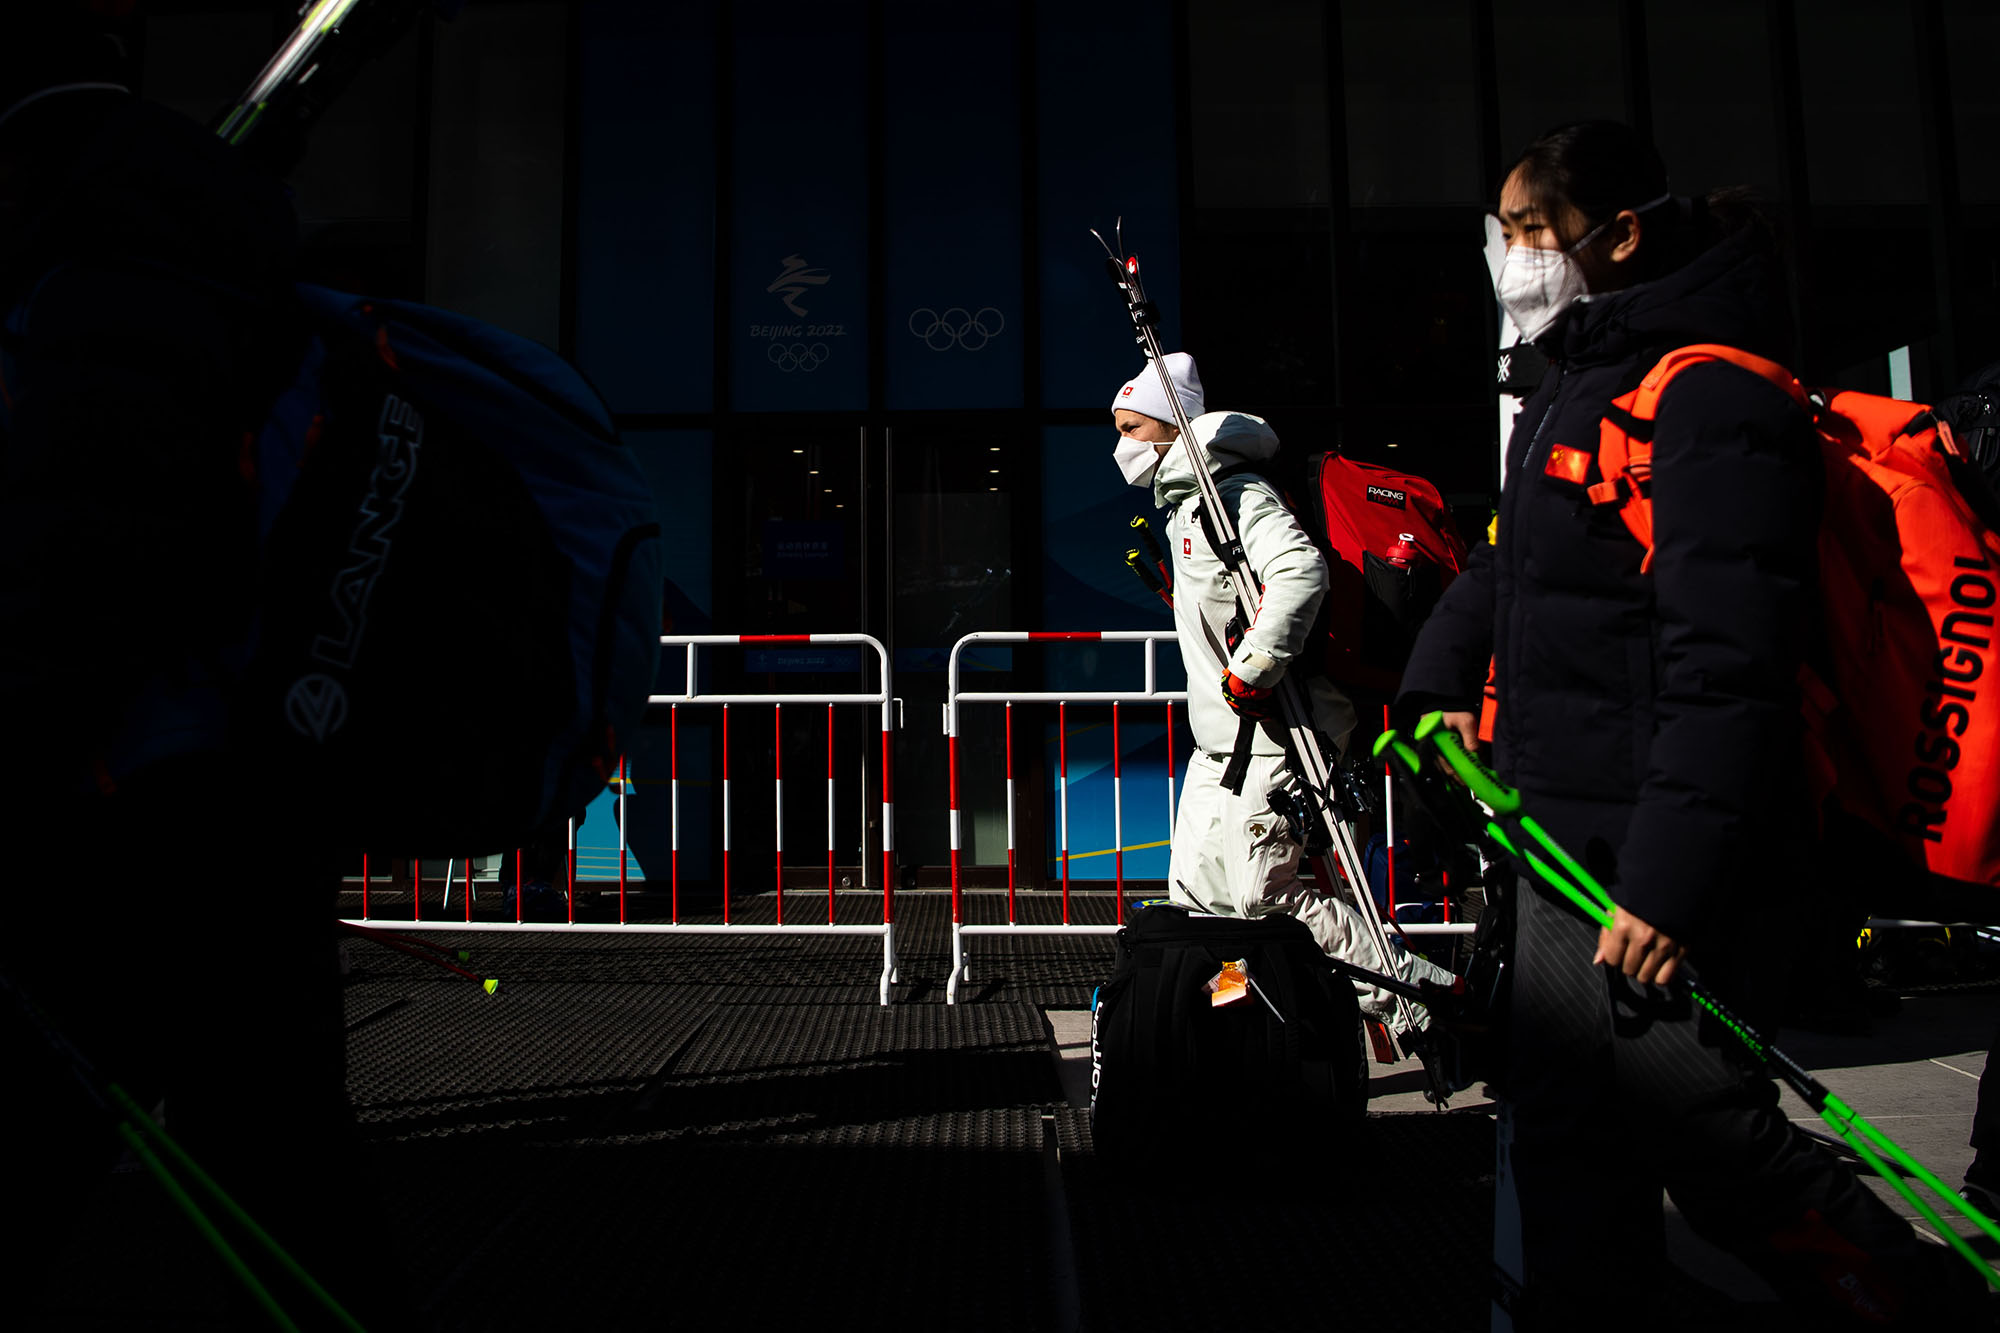 Skiers leave the Yanqing National Alpine Skiing Center after the men's downhill was postponed due to high winds on Sunday.